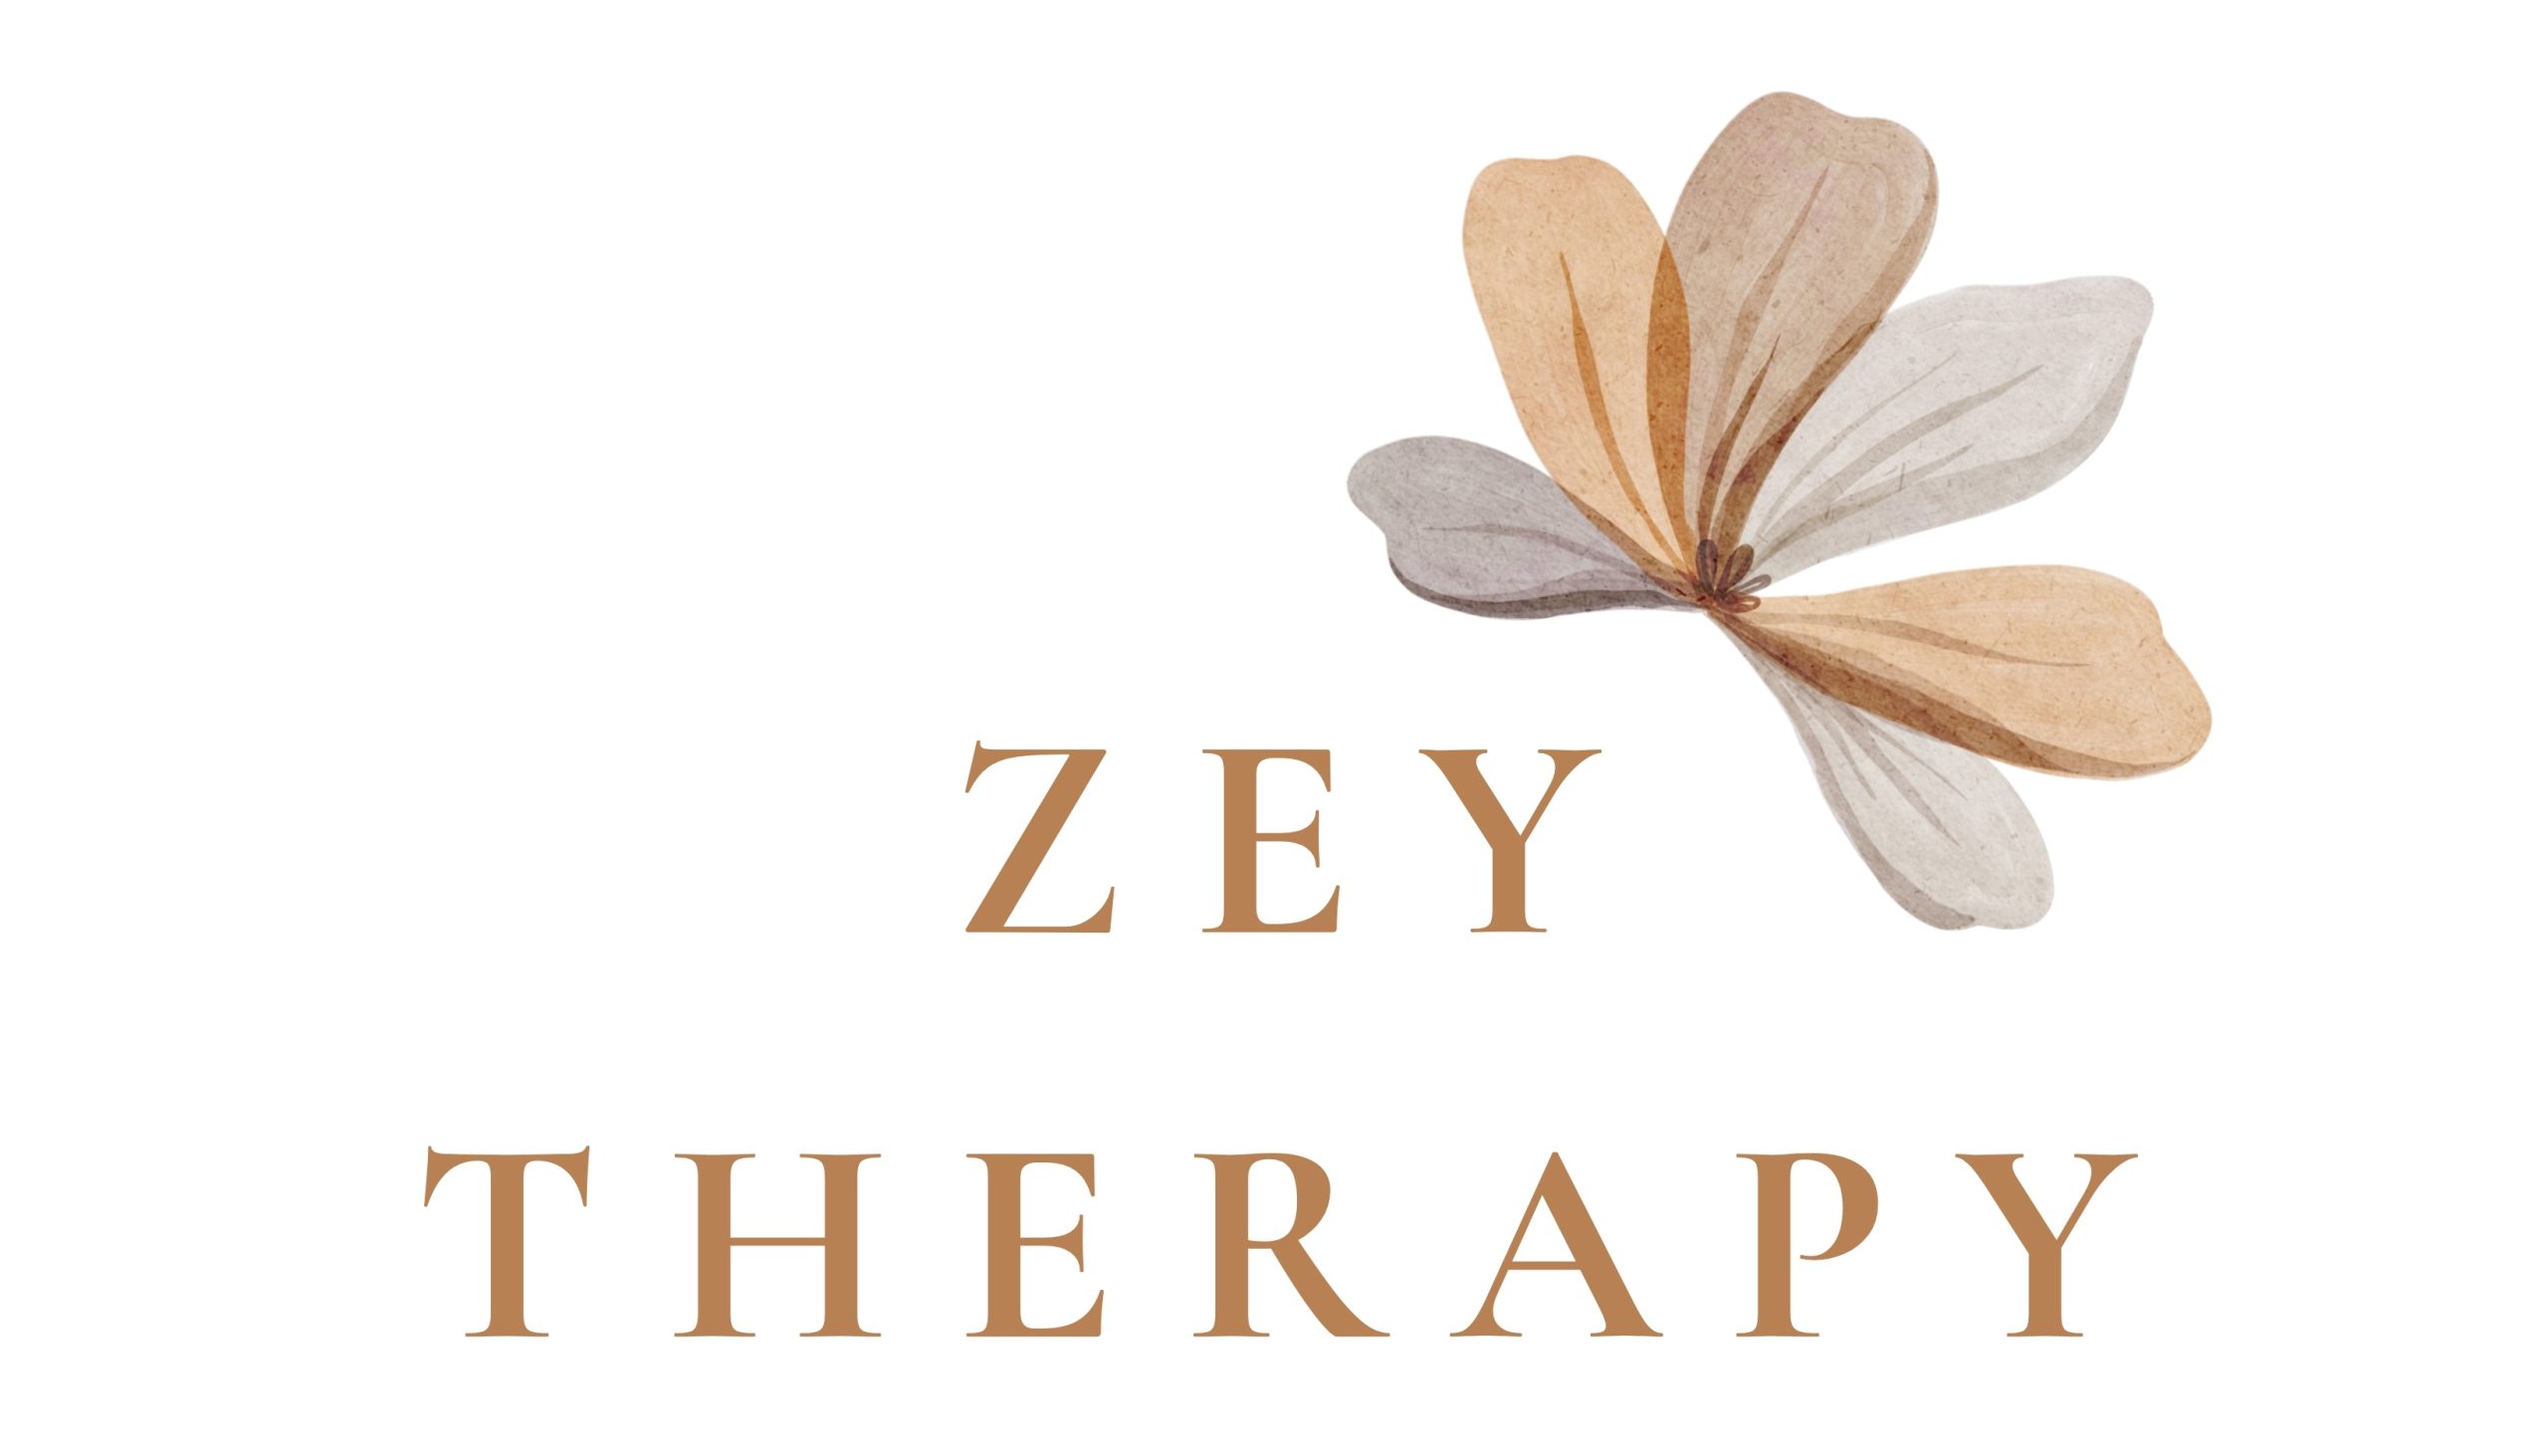 Zey Therapy